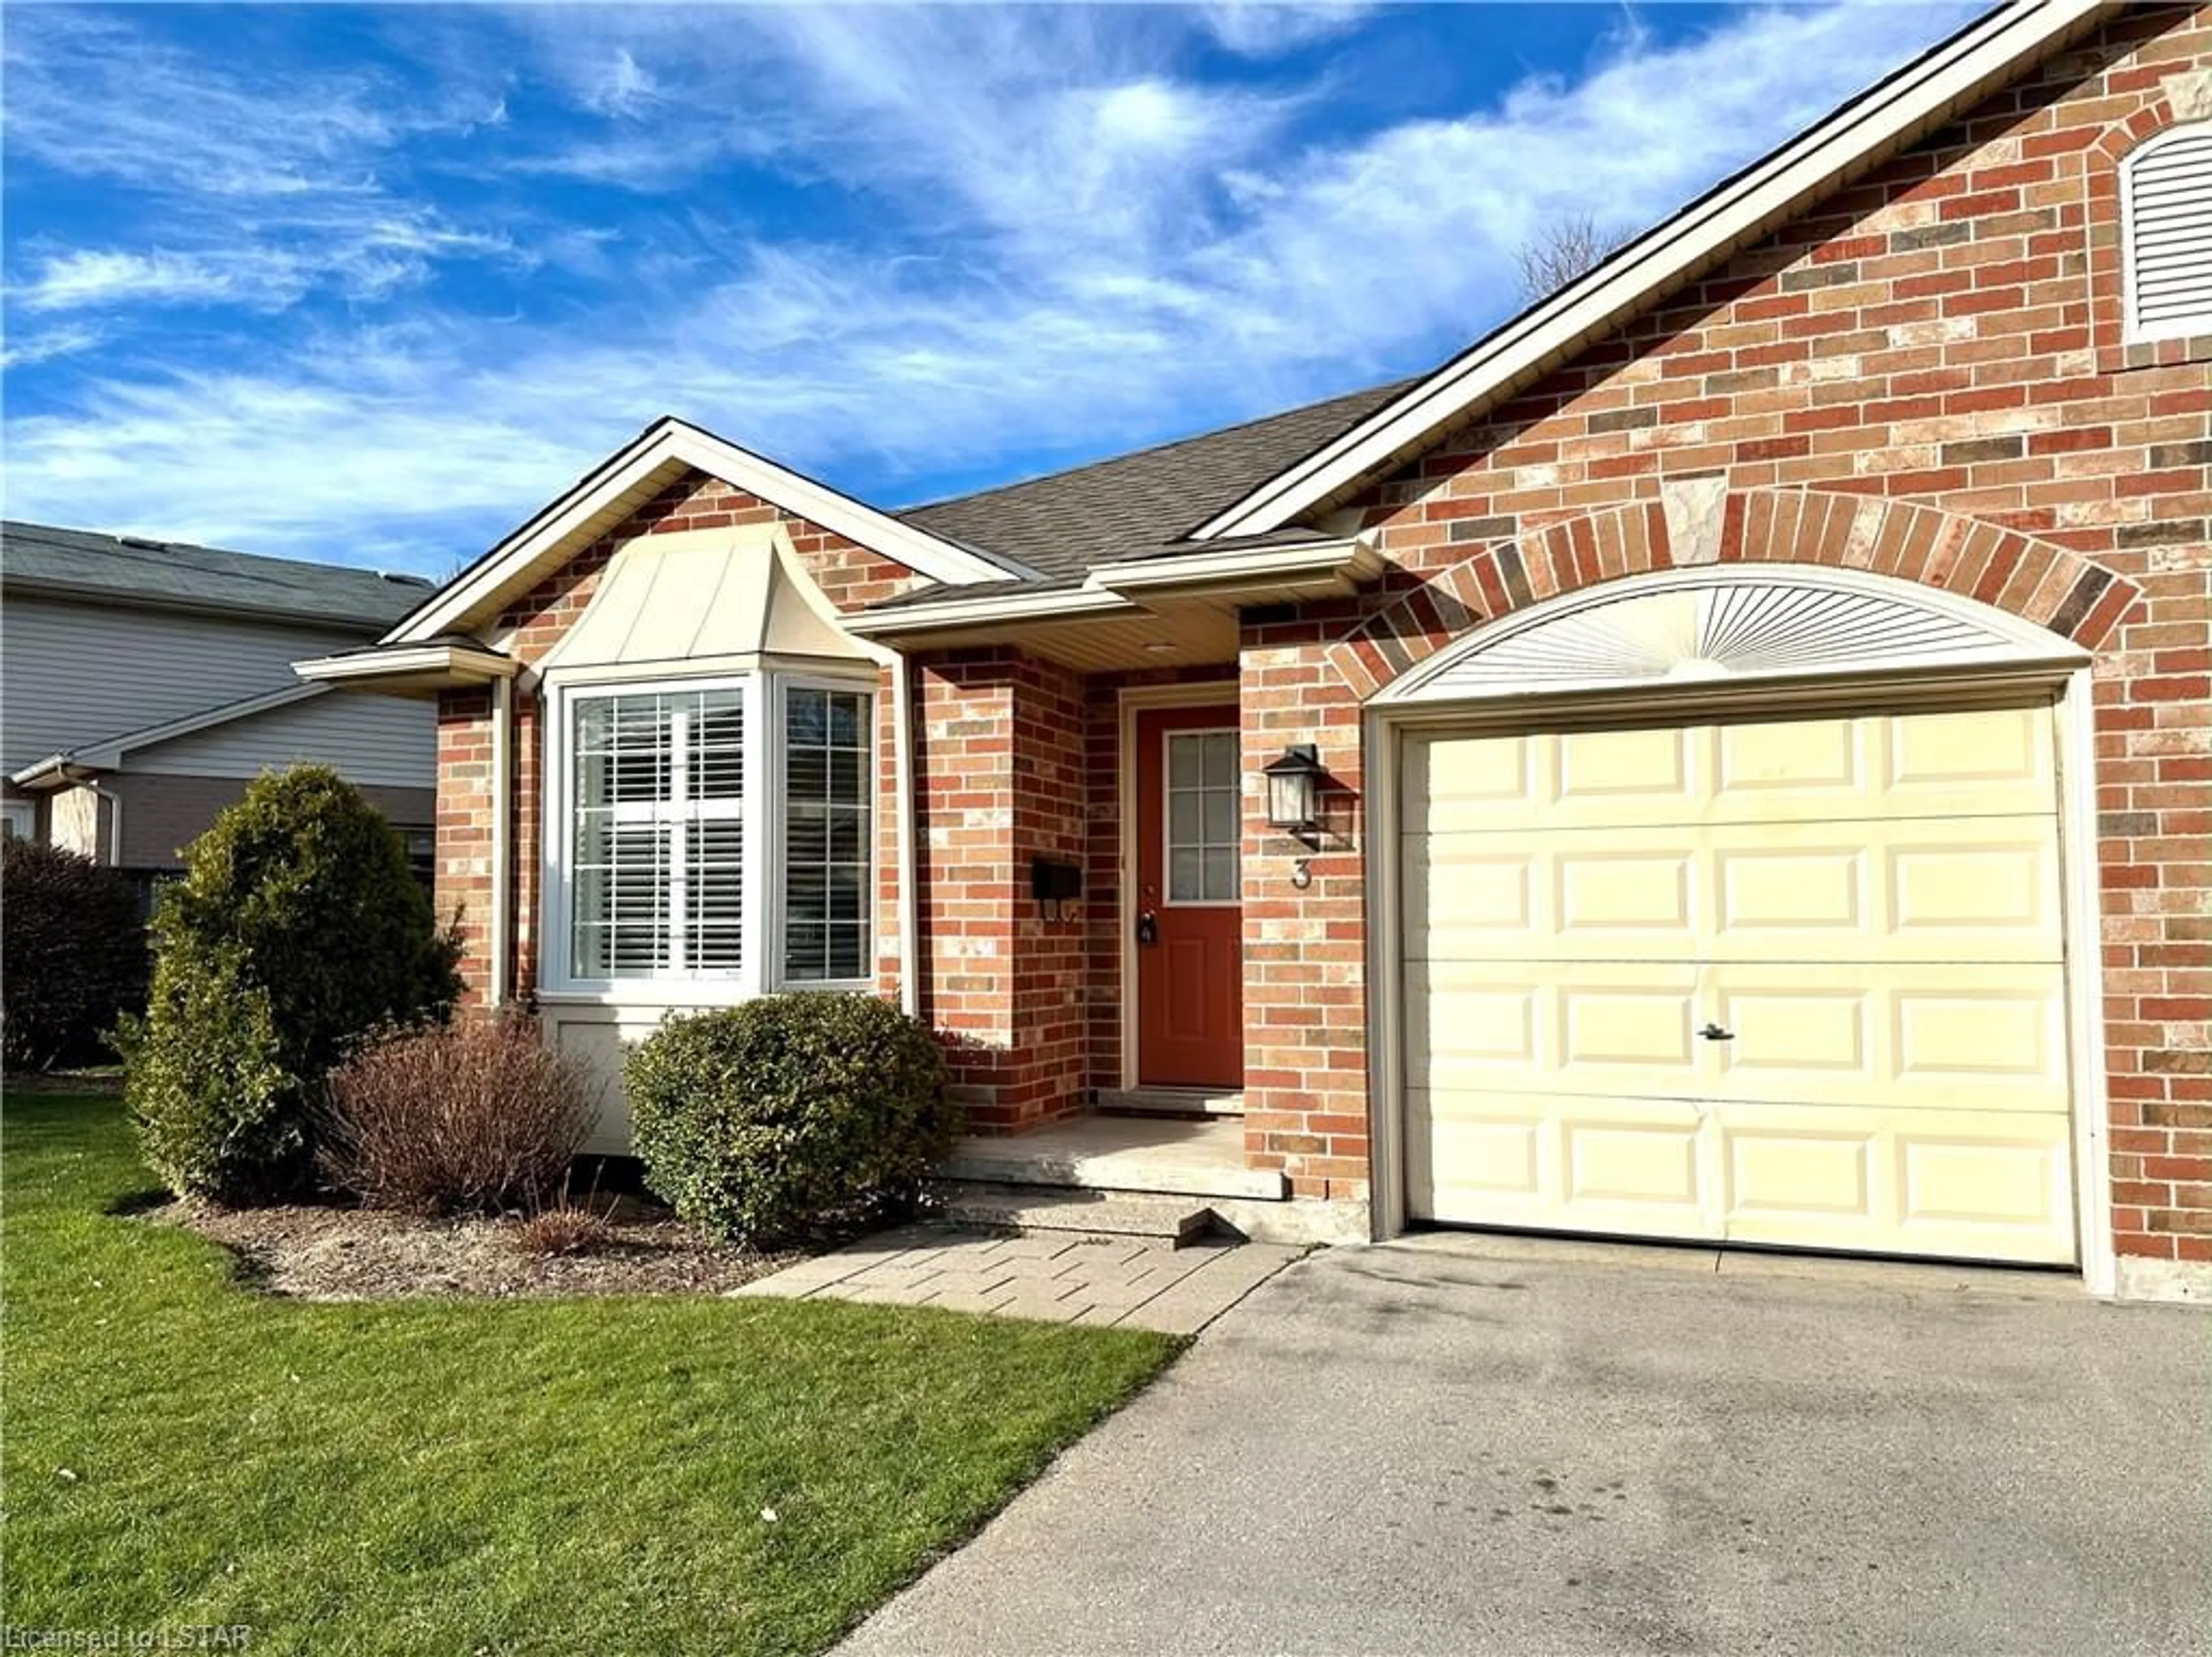 Home with brick exterior material for 1625 Attawandaron Rd #3, London Ontario N6G 3M5